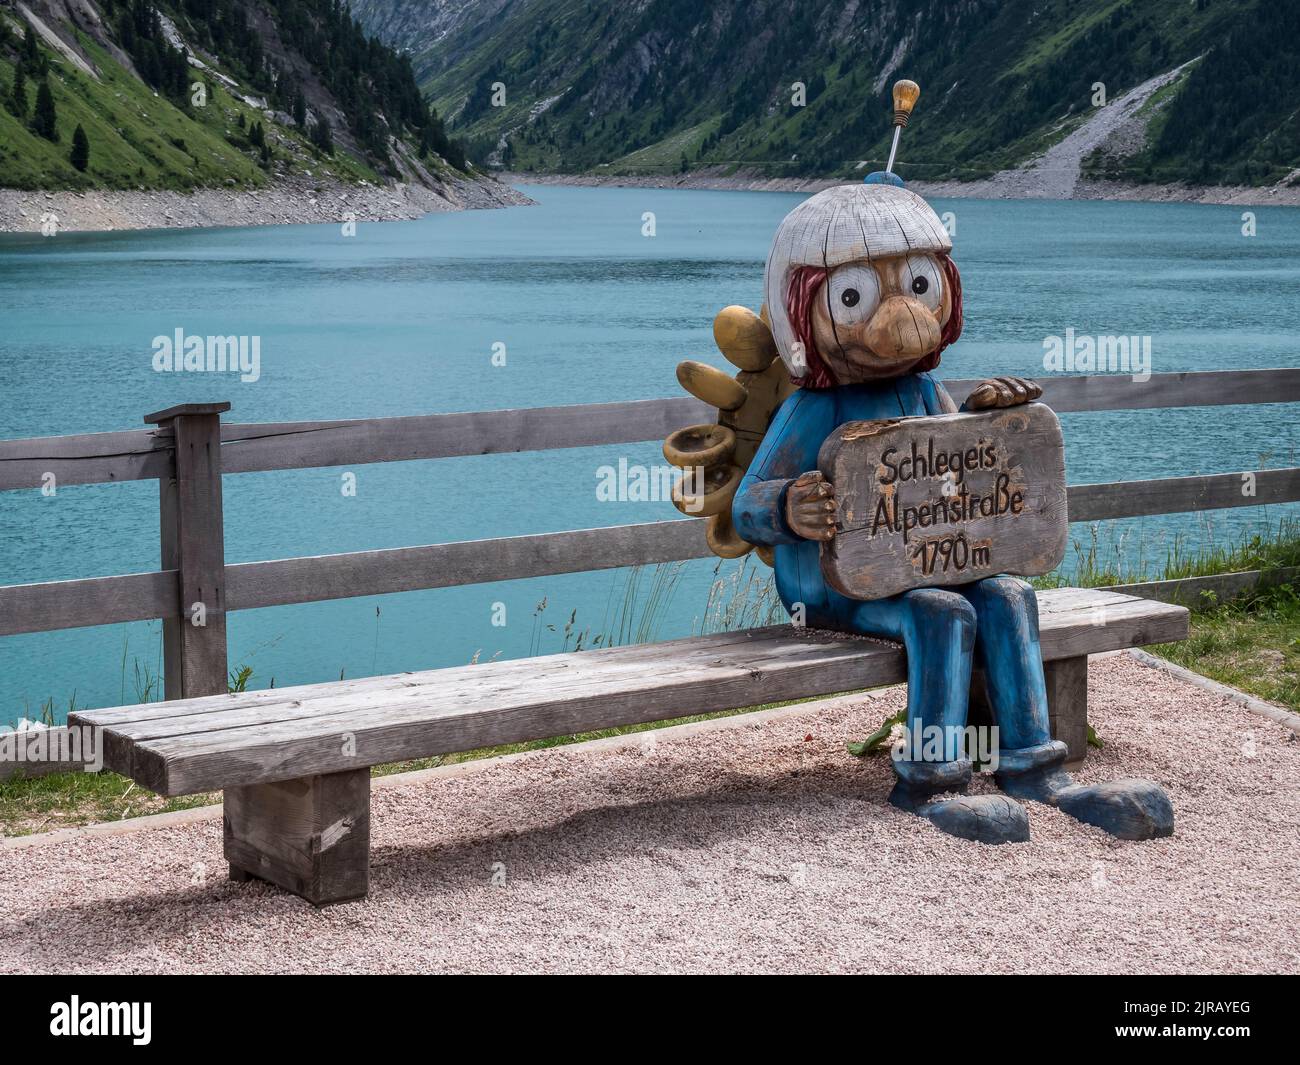 This is the Schlegeis Stausee hydroelectric reservoir at the head of the Zamsergrund valley near the resort town of Mayrhofen in the Zillertal Alps Stock Photo